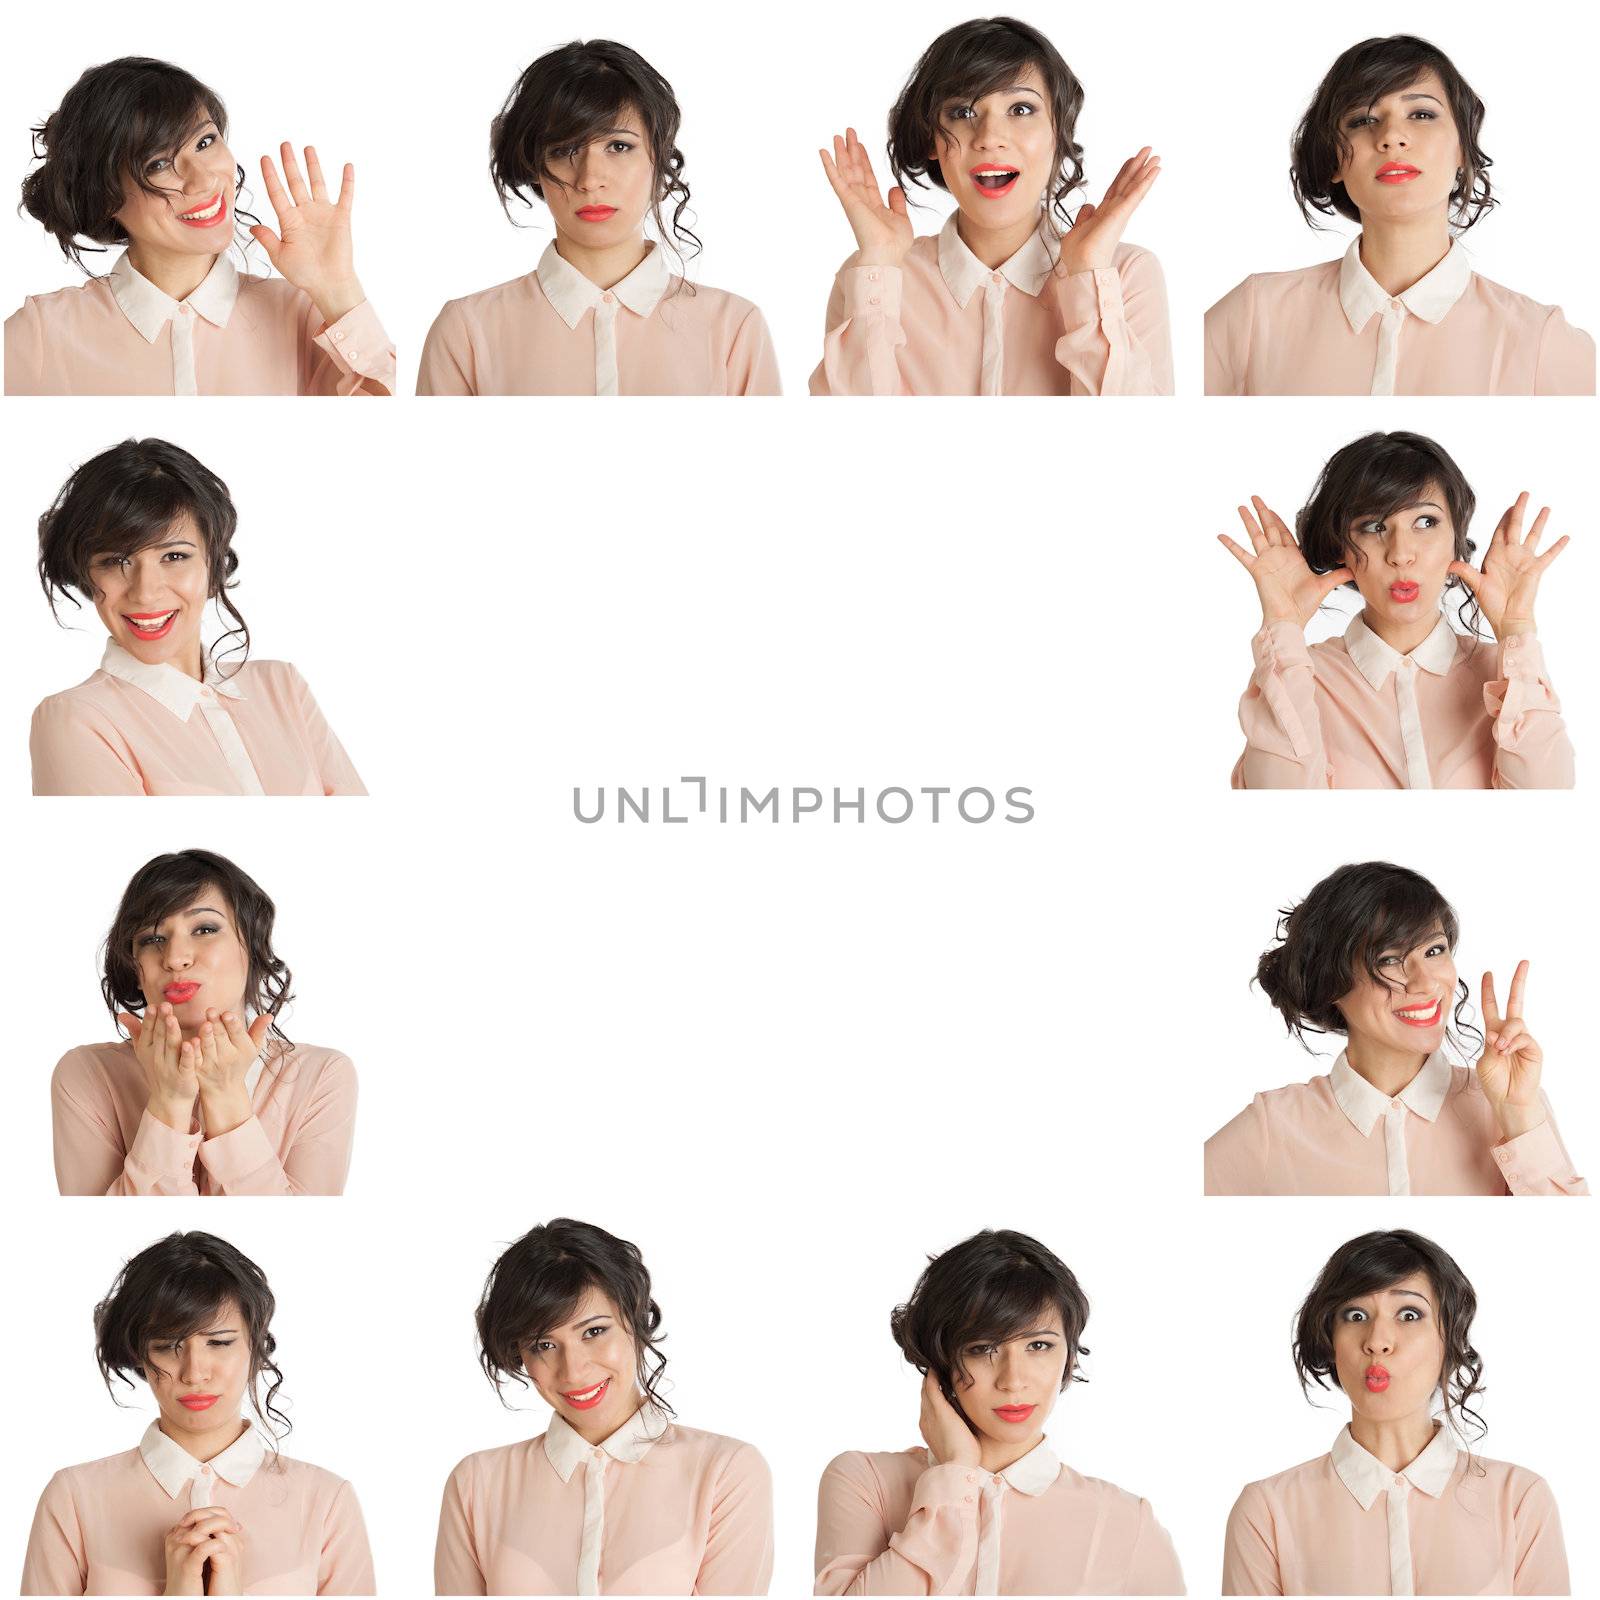 Collage of a woman with different facial expressions on a white background